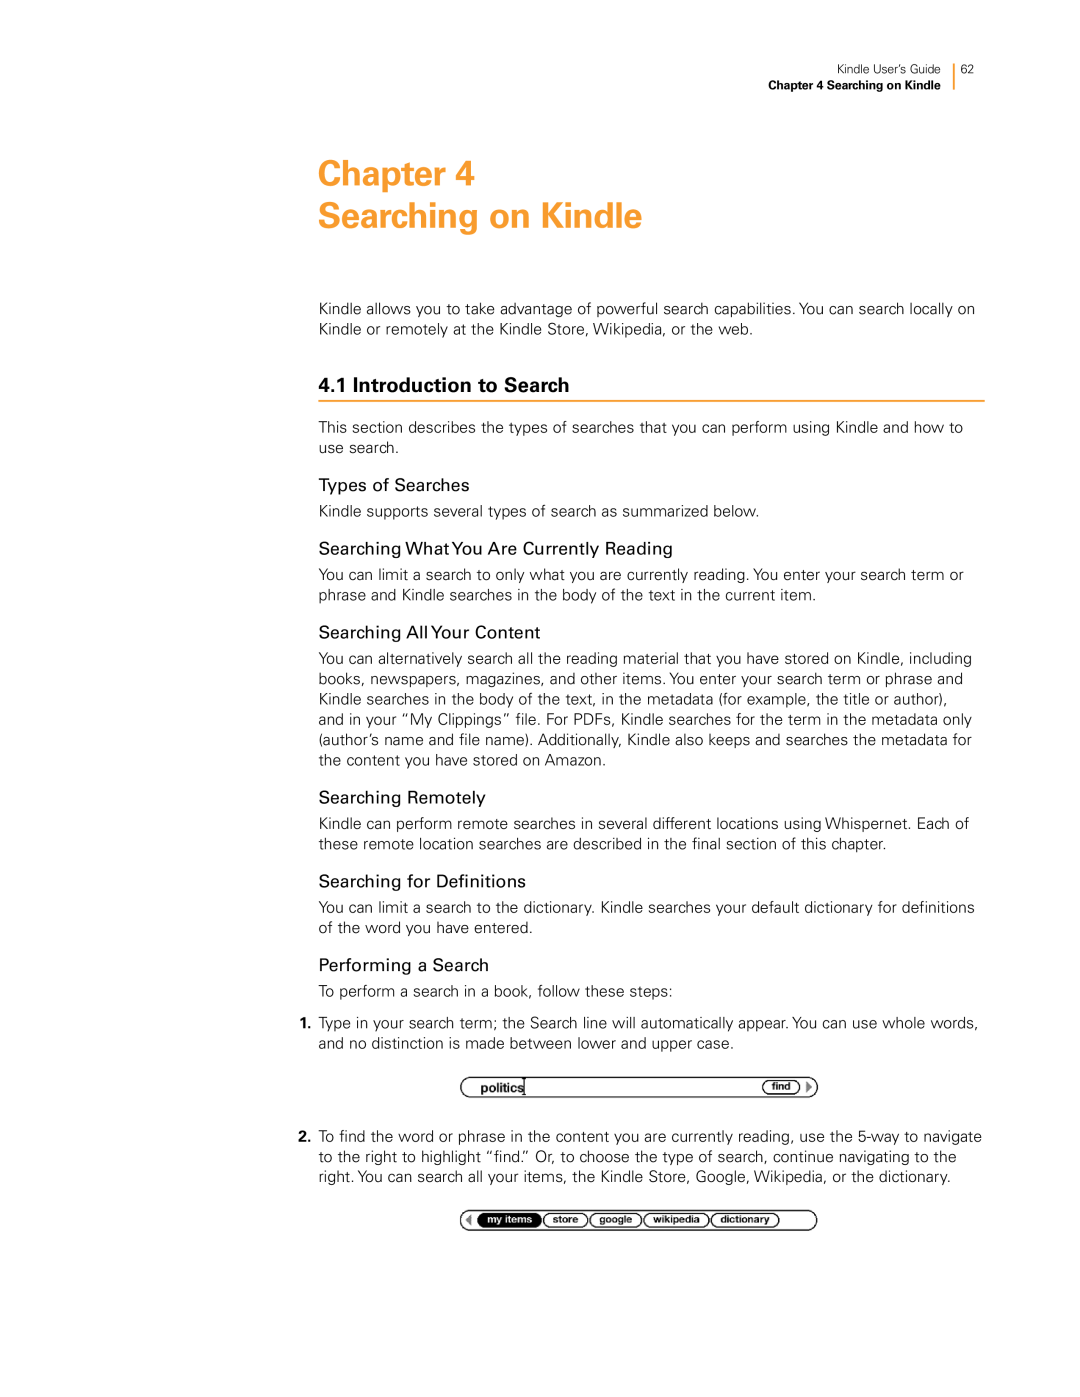 Amazon KNDKYBRD3G manual Chapter Searching on Kindle, Introduction to Search, Types of Searches, Searching All Your Content 